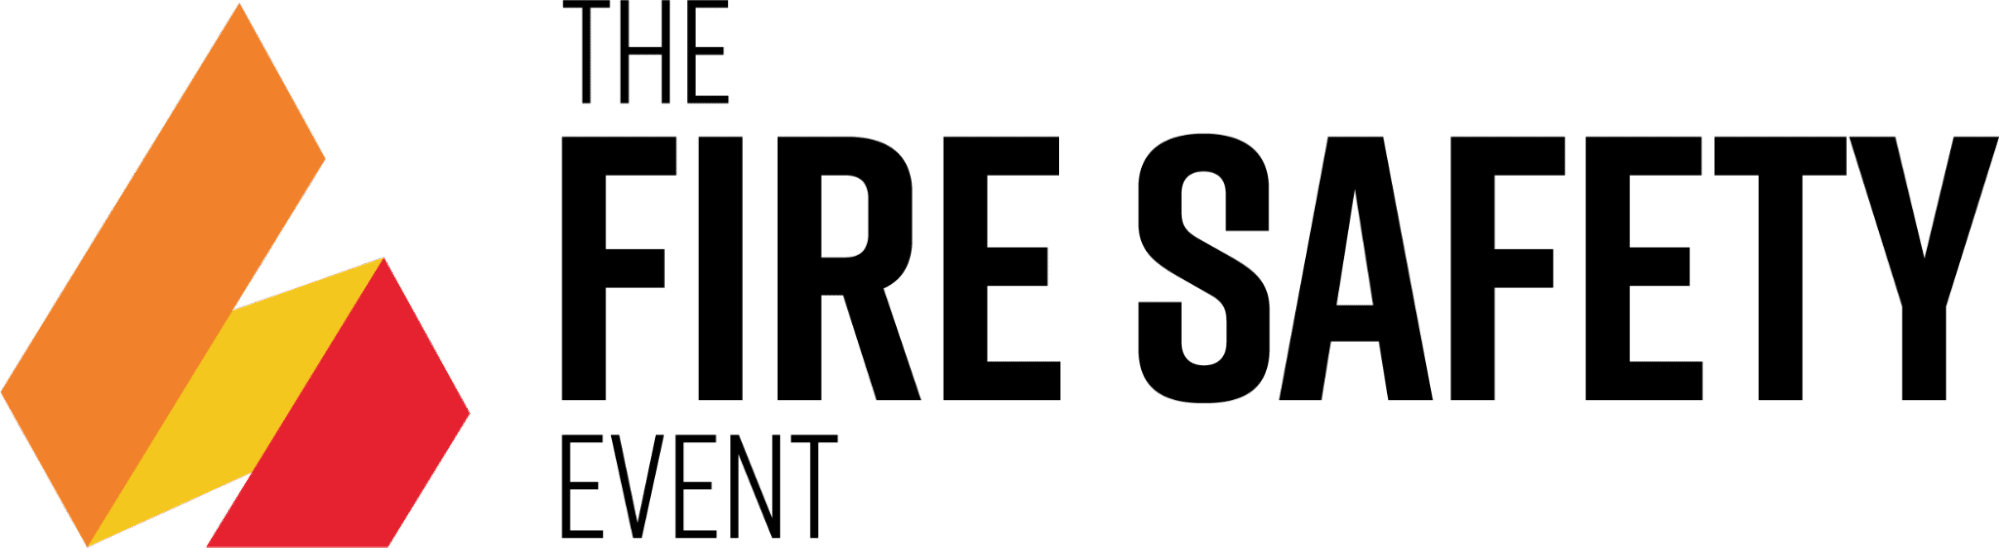 The fire safe event